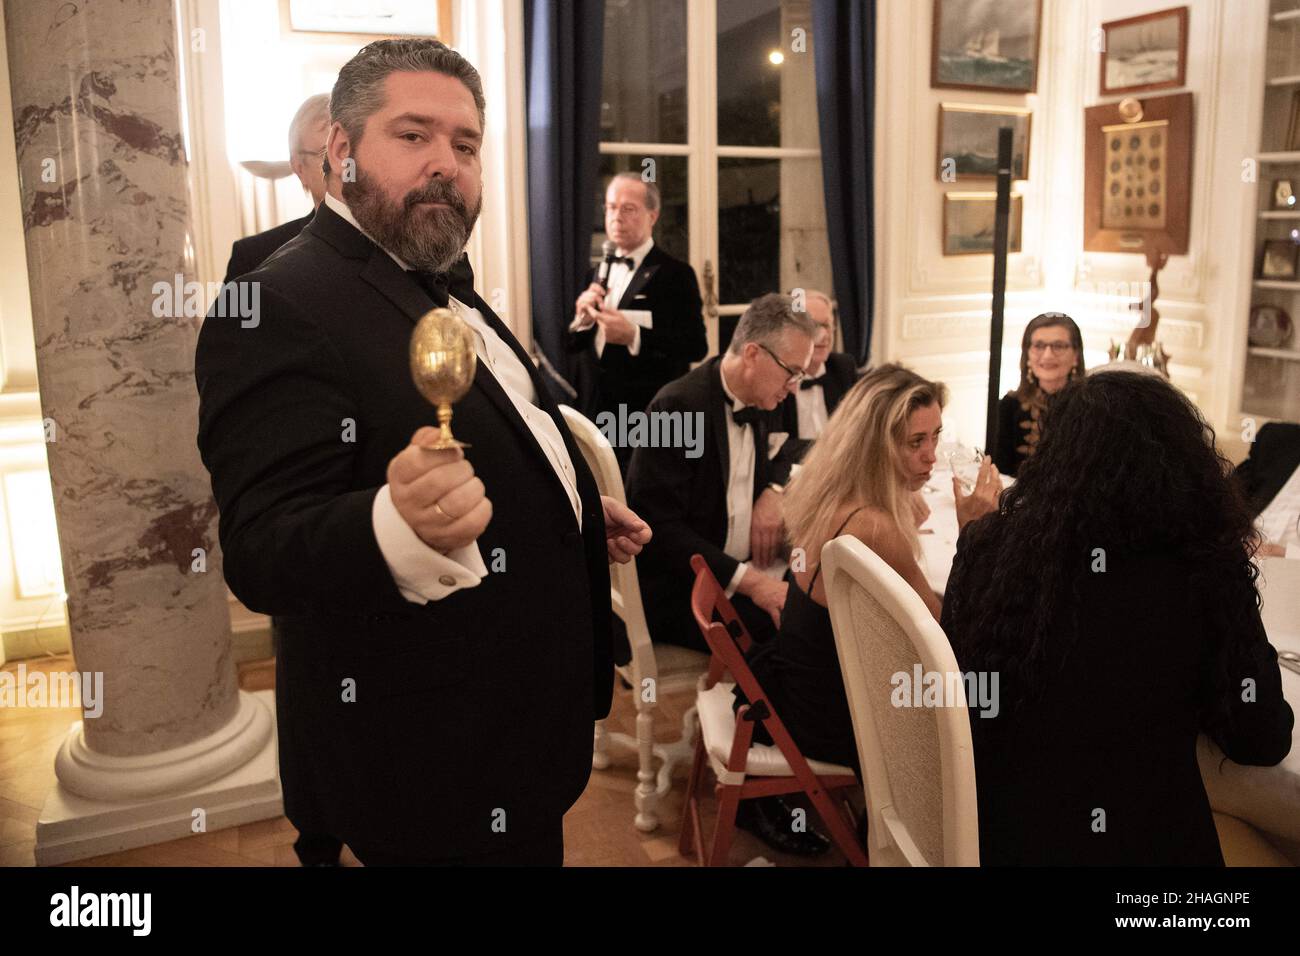 Grand Duke George Mikhailovich of Russia, (Georgi Mikhailovich Romanov) attends the dinner organized by the Assembly of the Russian Nobility in France (A.N.R.F), President Prince Stephane Belosselsky at the Yacth Club de France, on December 10, 2021 in Paris, France. Photo by David Niviere/ABACAPRESS.COM Stock Photo